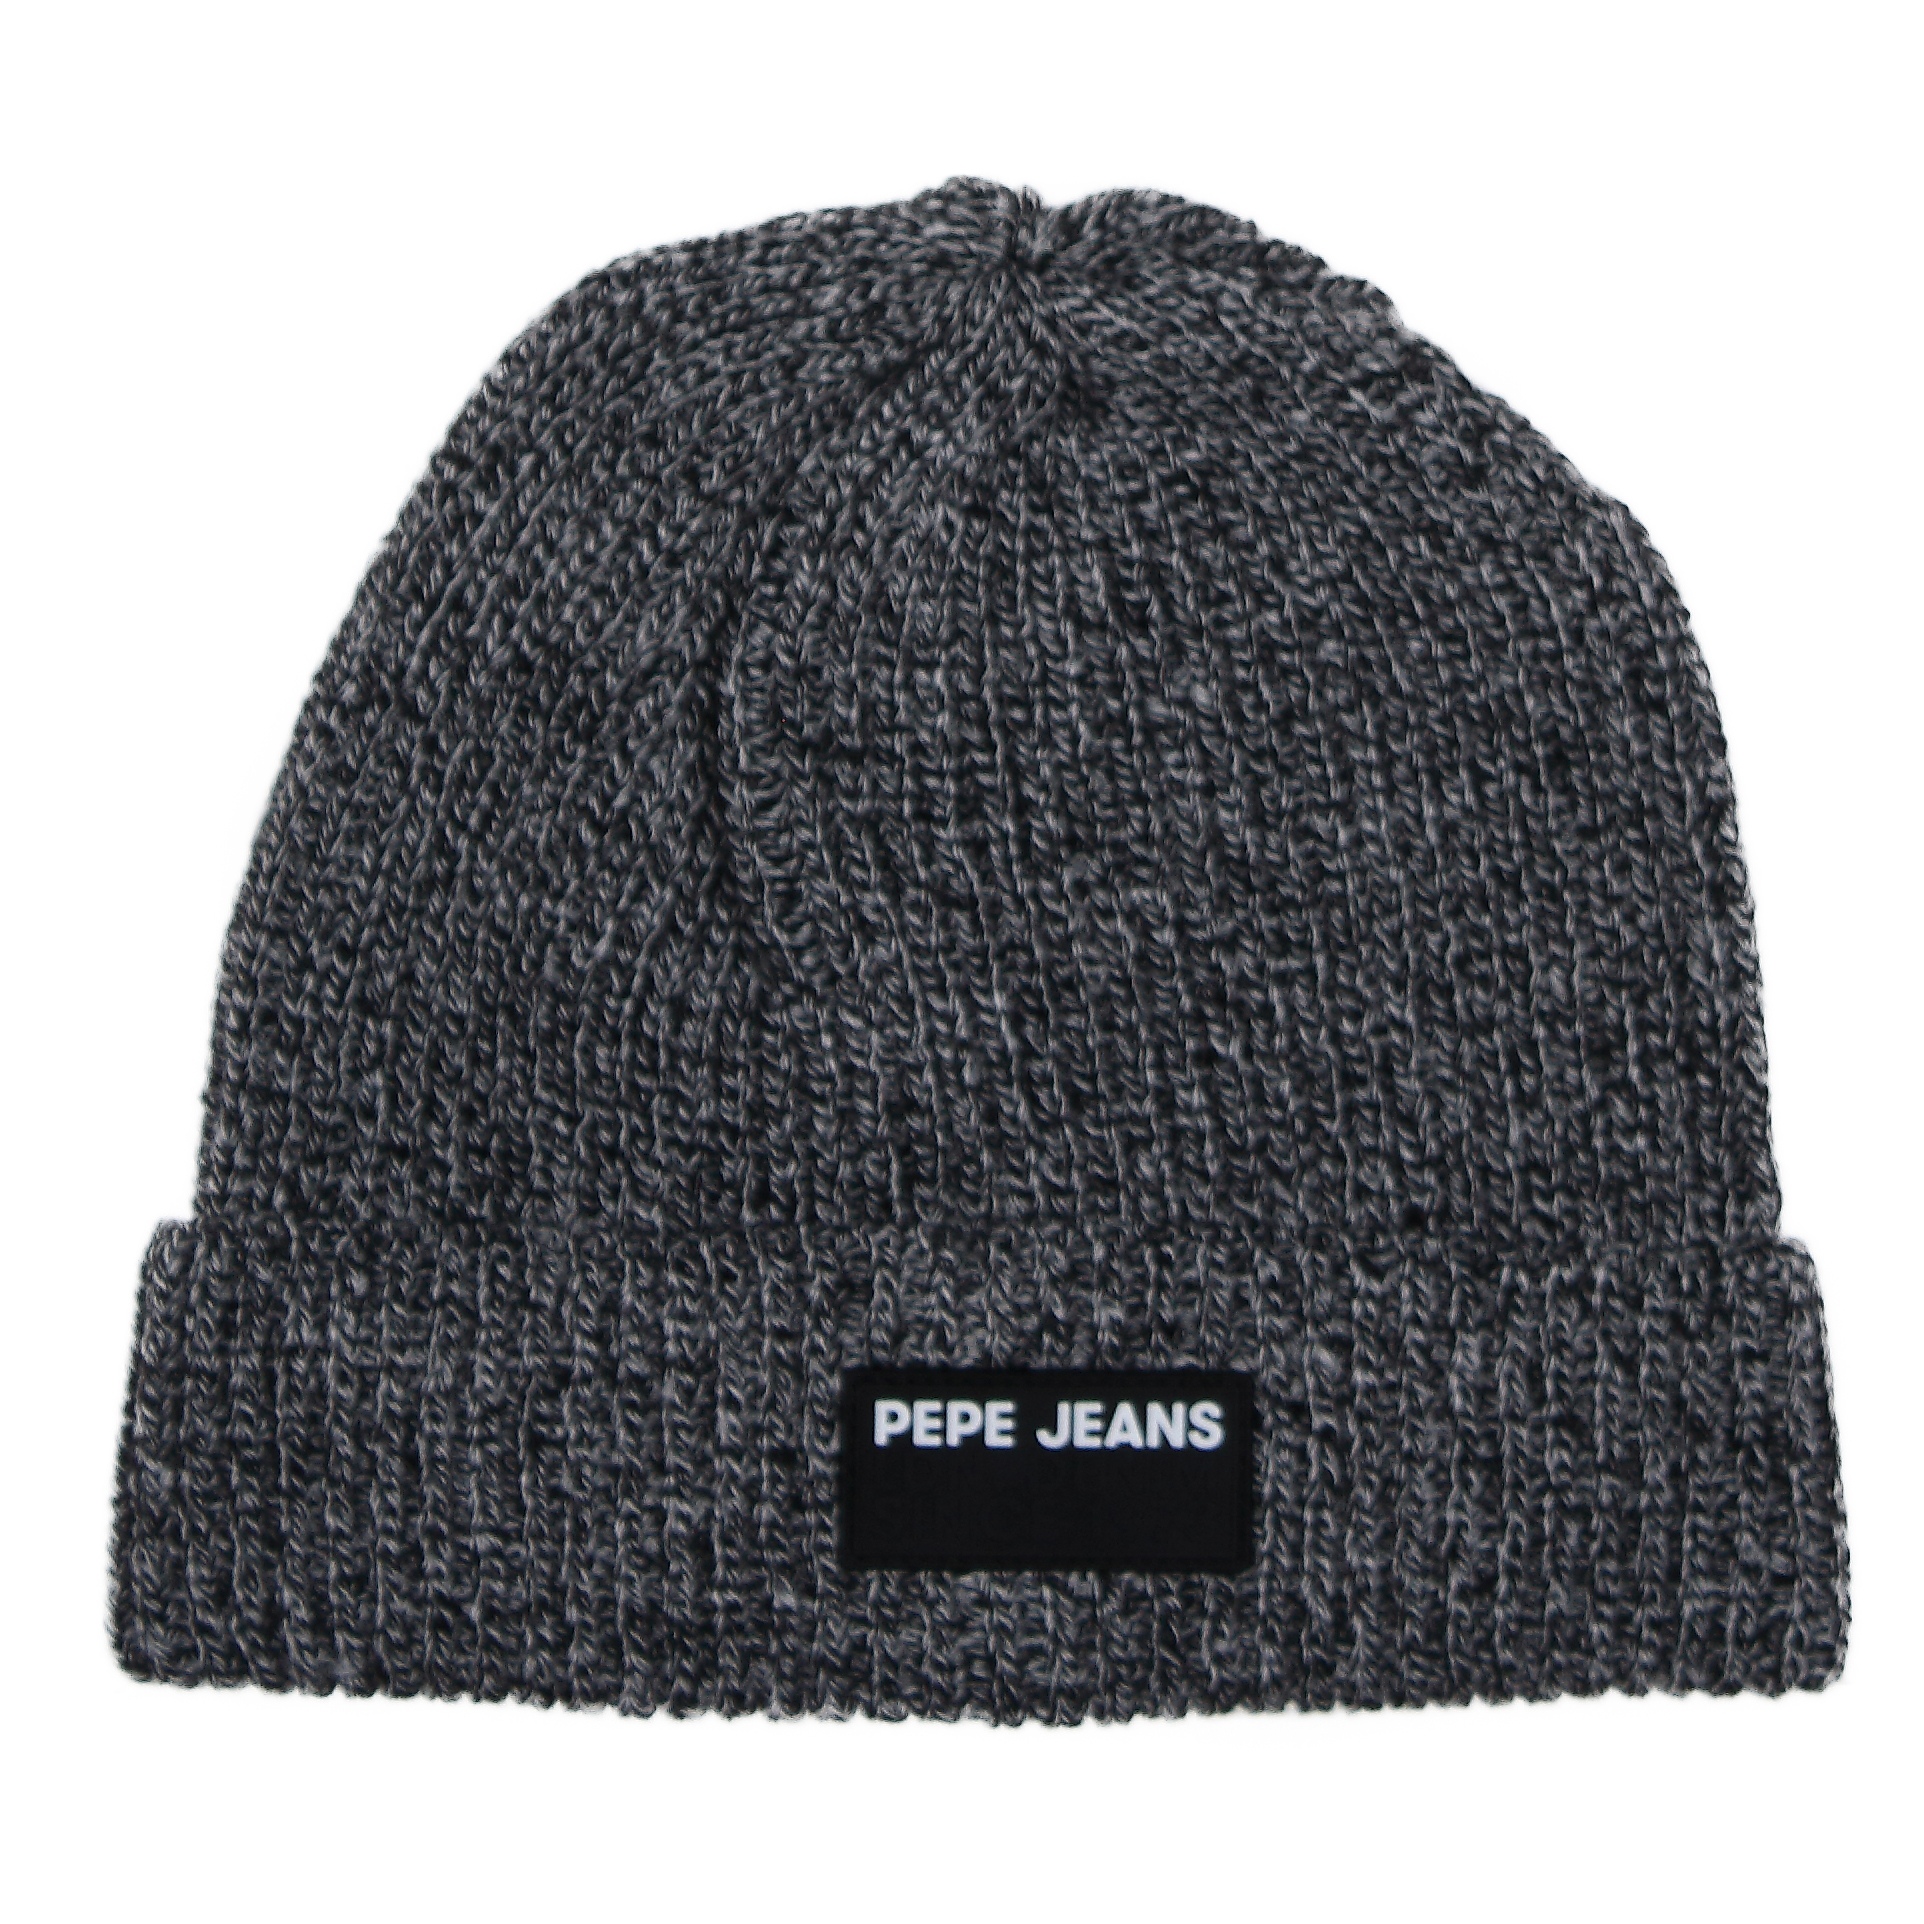 https://www.leadermode.com/210563/pepe-jeans-connor-hat-987-charcoal.jpg